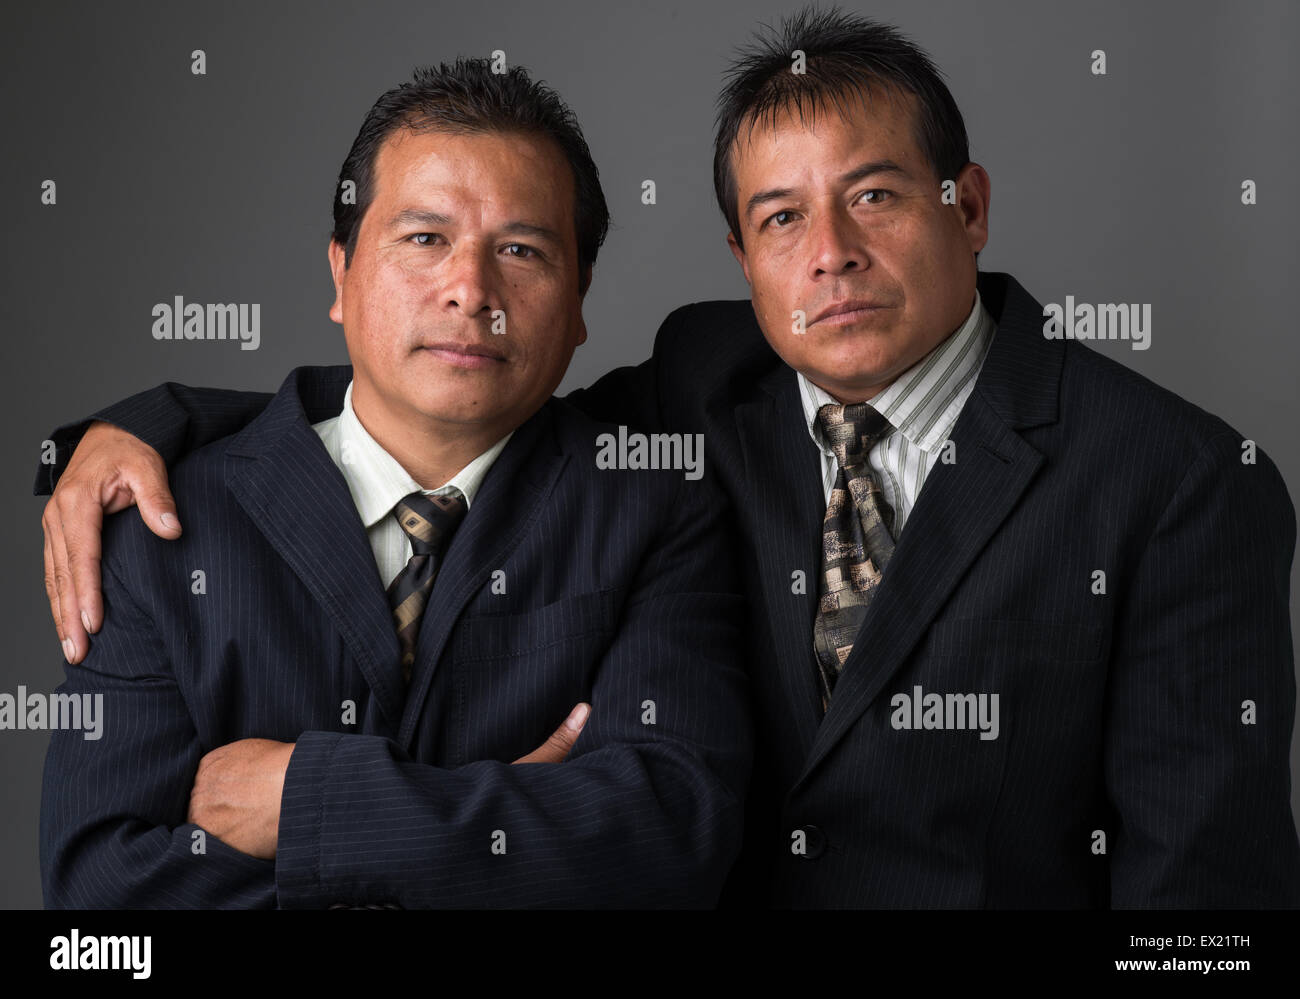 Hispanic business men wearing business suit and neckties posing for a portrait Stock Photo